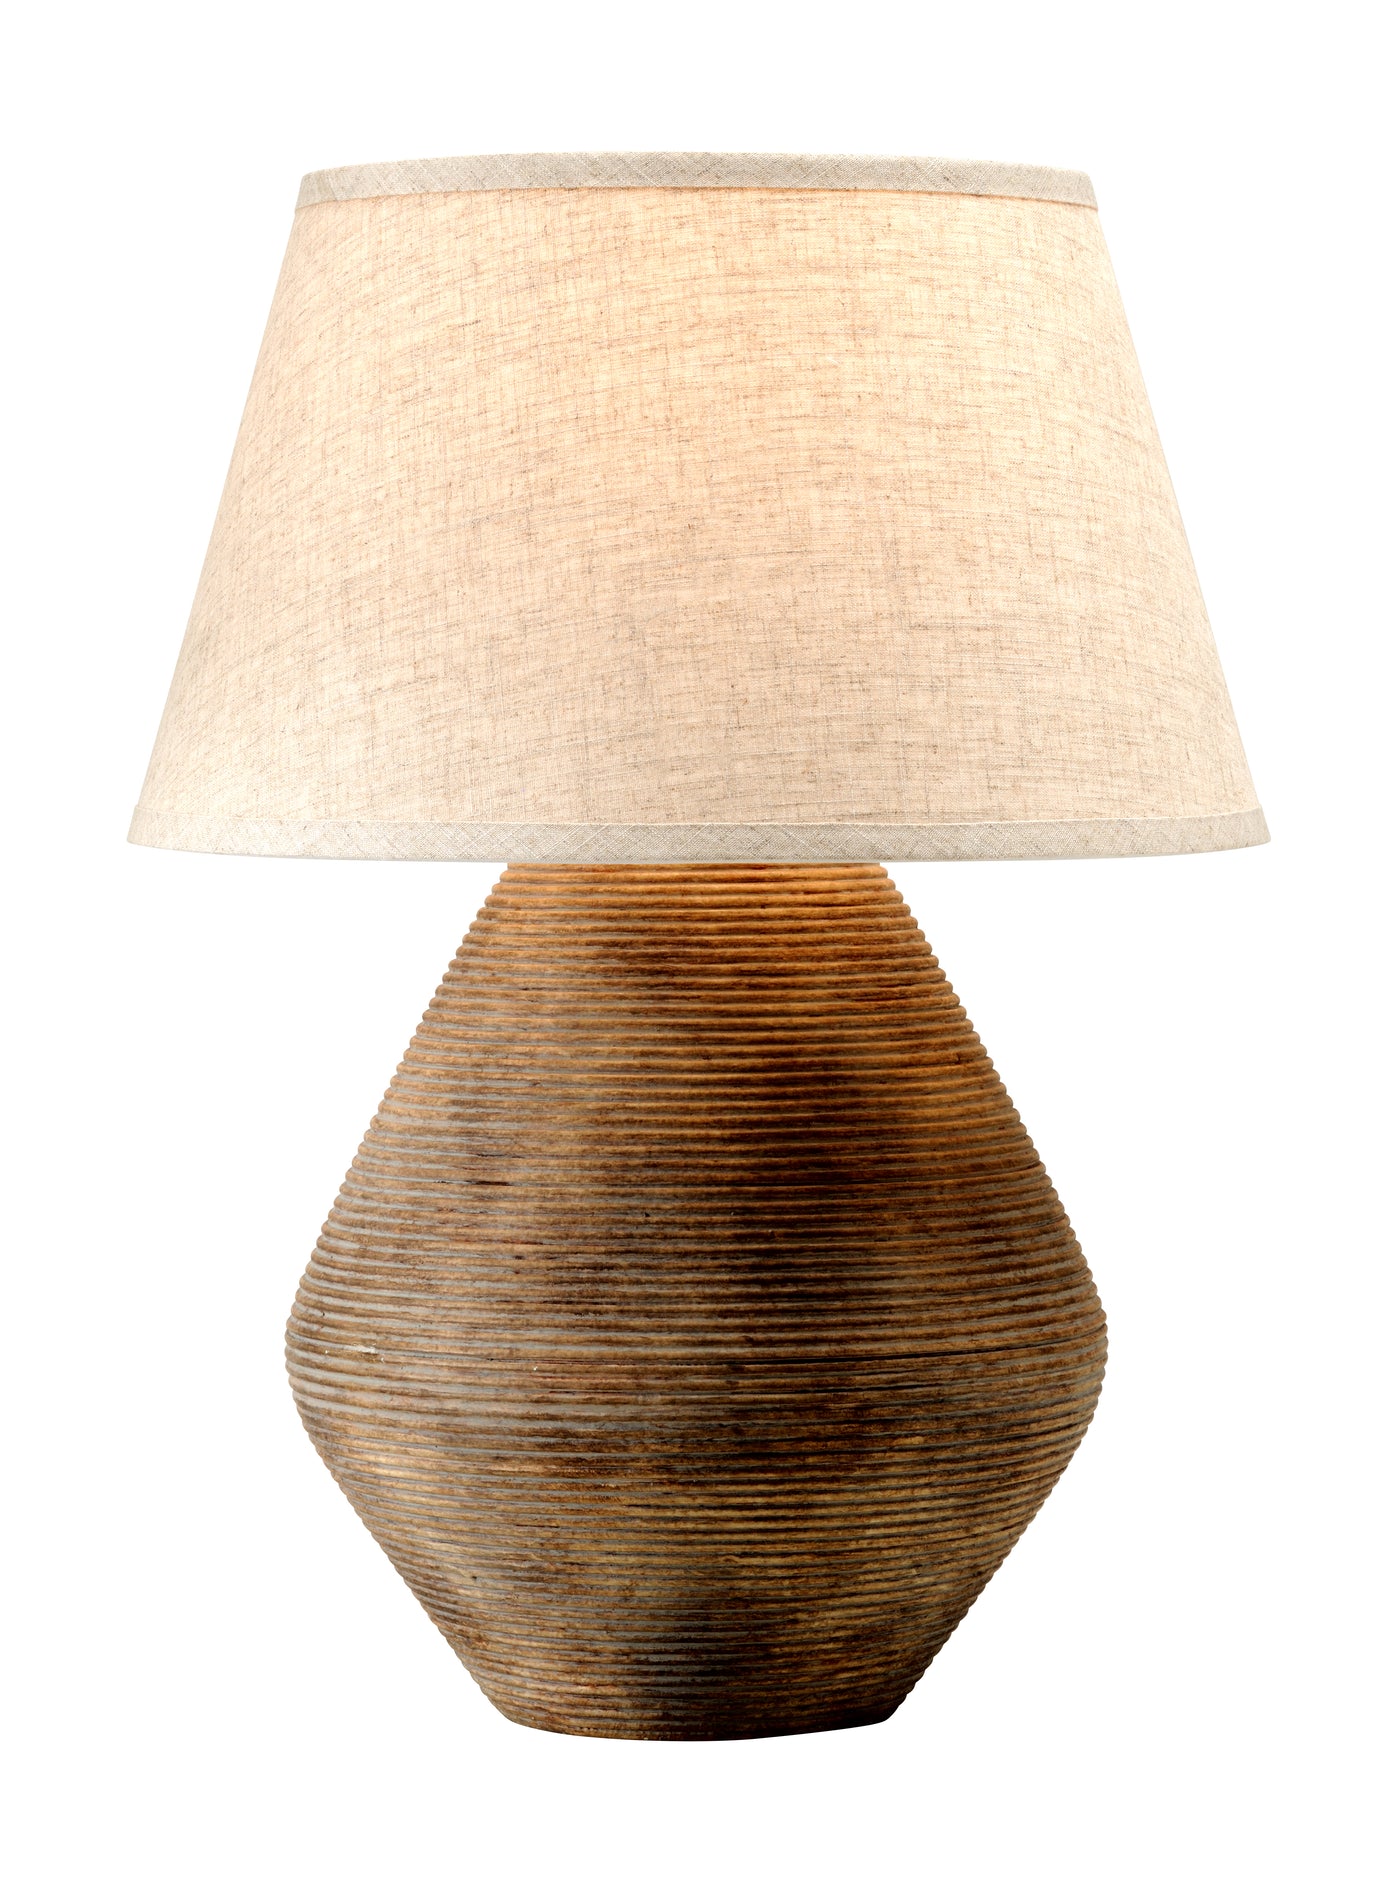 Calabria 1 Light Table Lamp